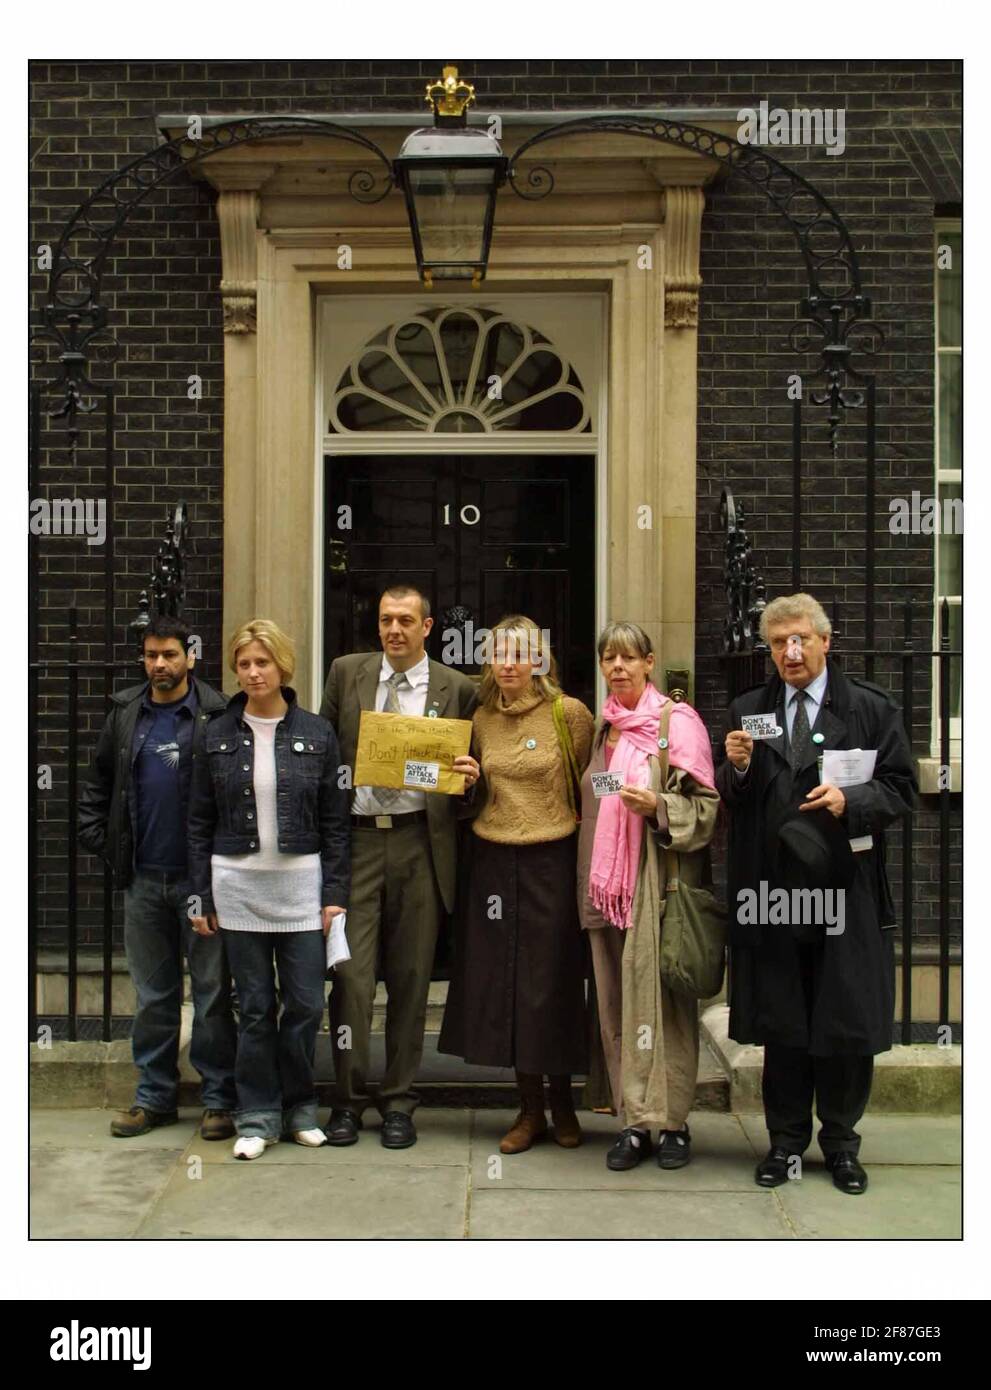 A group of prominent actors, writers and artists today delivered a letter, signed by more than 100 members of the creative community, against the poss war on Iraq to Downing Street.LtoR      Pandit G,  Suzannah Harker, Jeremy Dear, Jemma Redgrave, Frances de la Tour and Malcolm Tierney. pic David Sandison 18/9/2002 Stock Photo